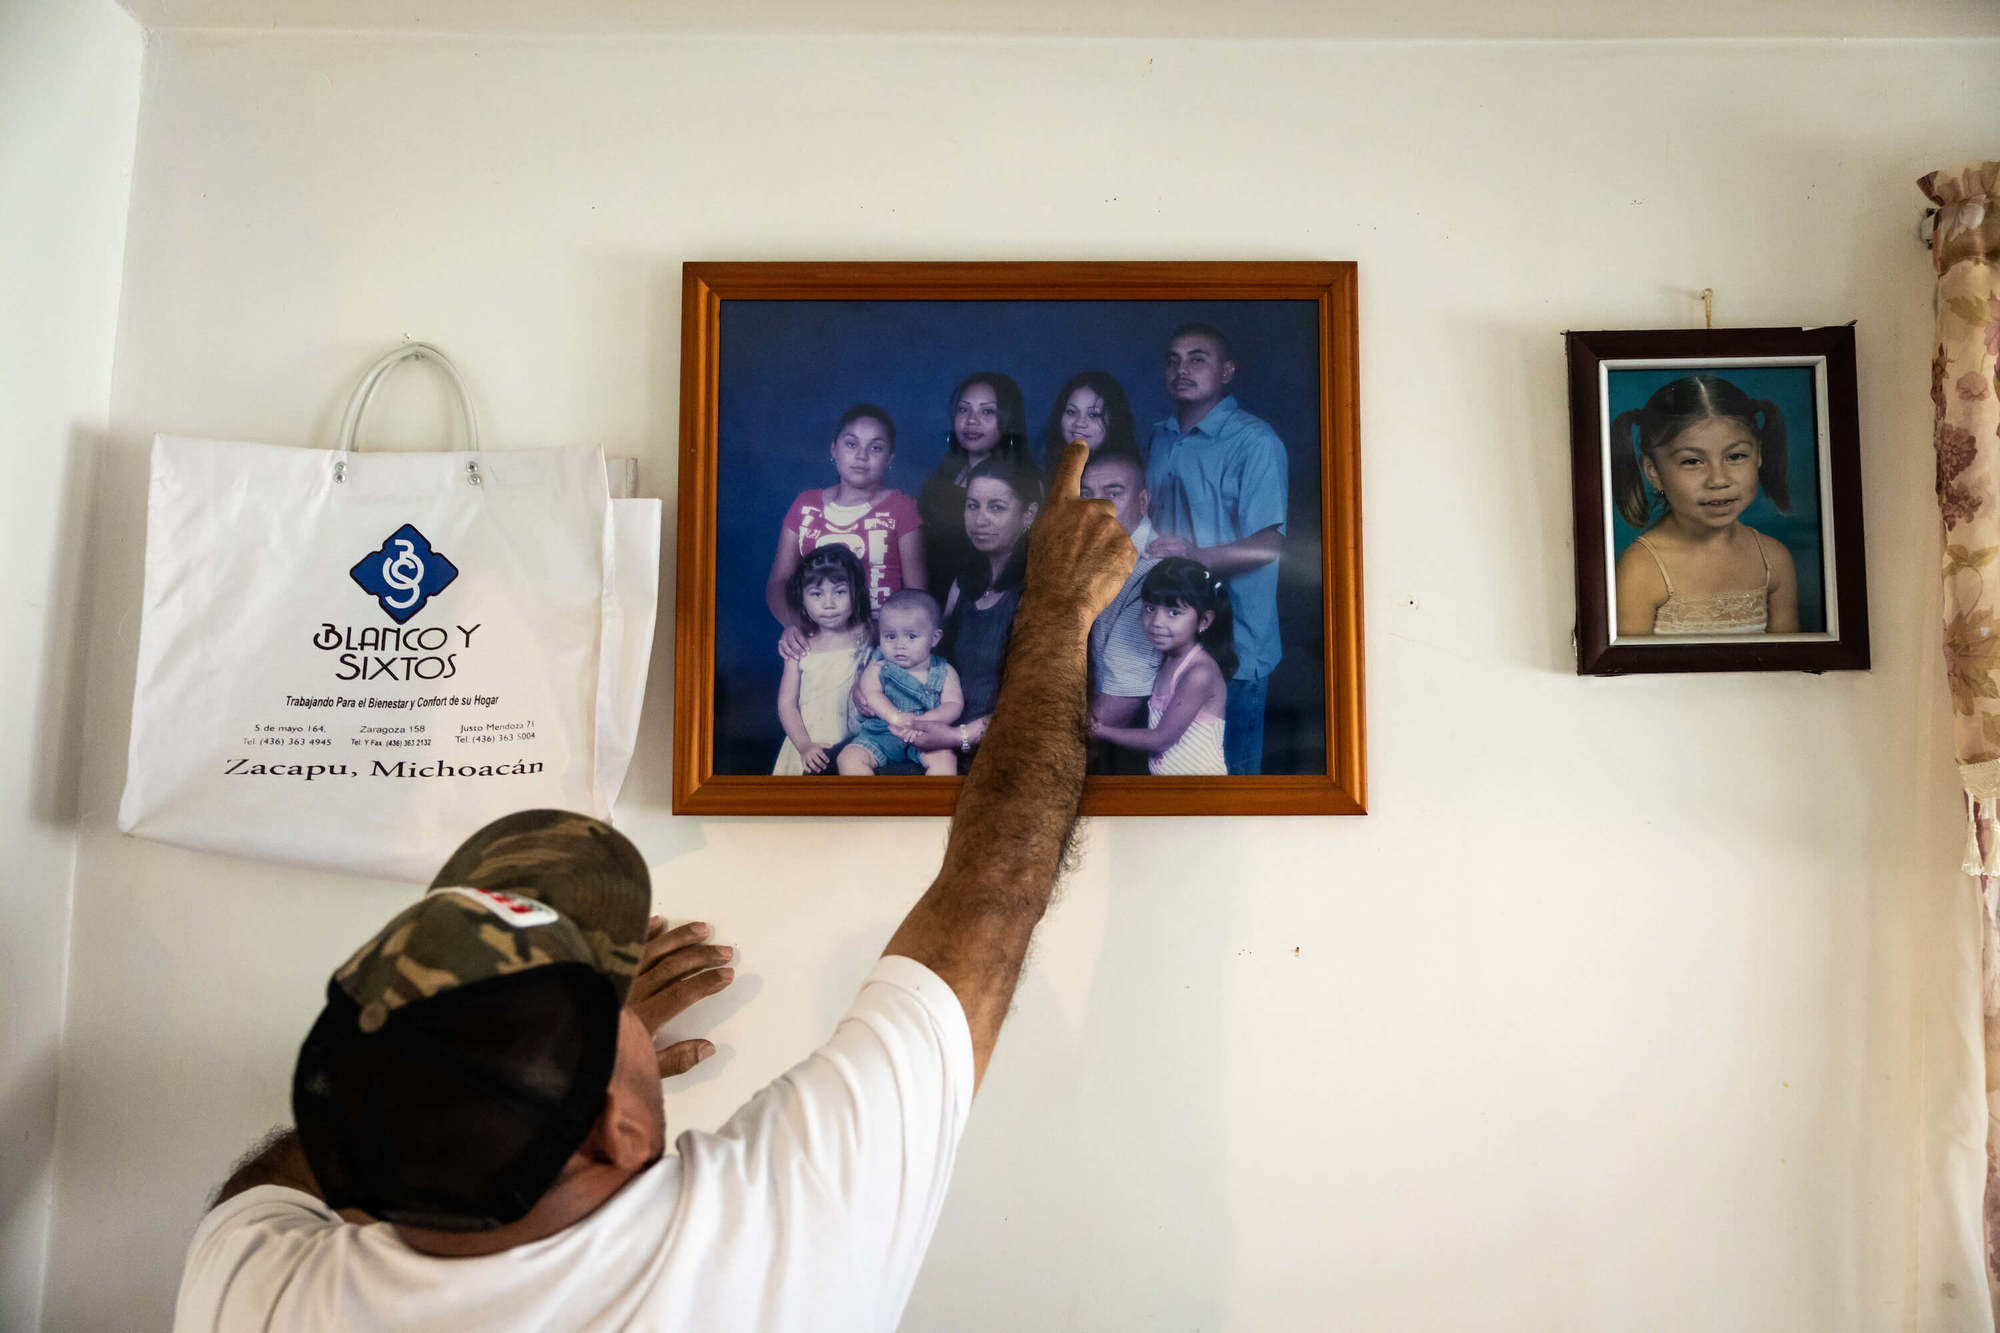 Nicanor Guillen points out his daughter Lupe in a family photo. Lupe had cancer as a child, a fact that Guillen suspects may be related to the contaminant present in the community’s water.